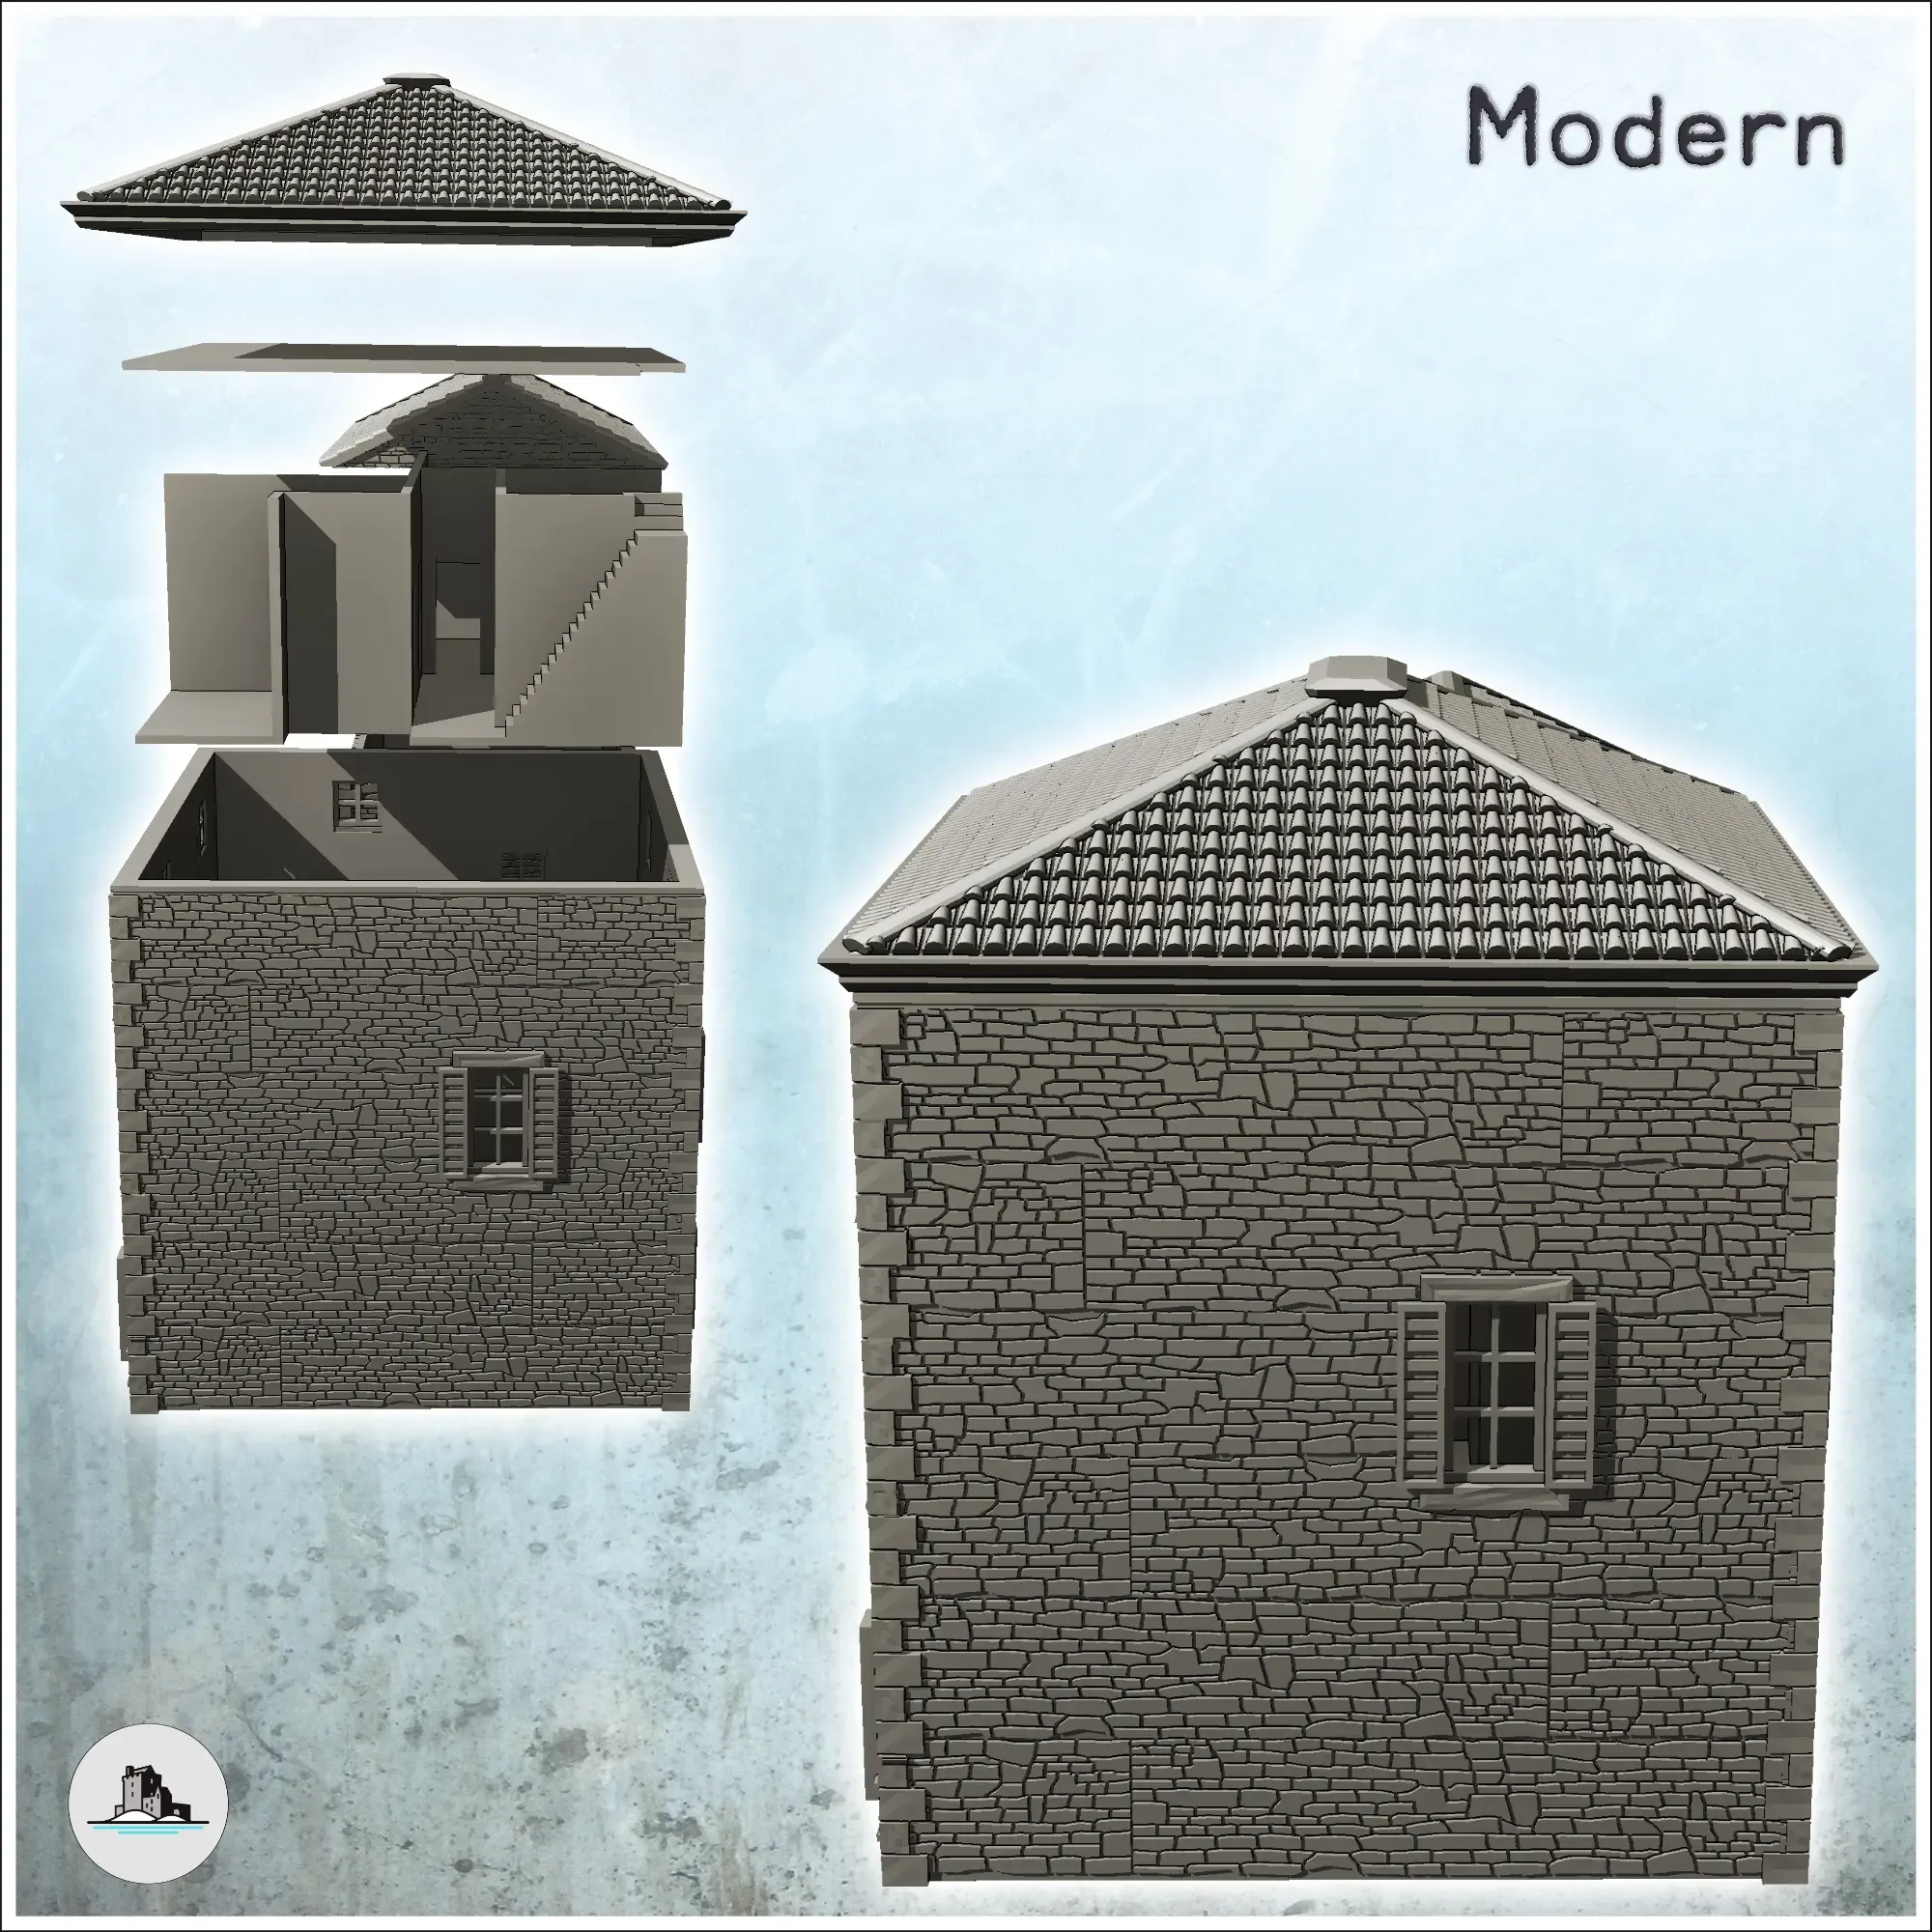 Set of two tiled roof houses with stone walls and shutters (